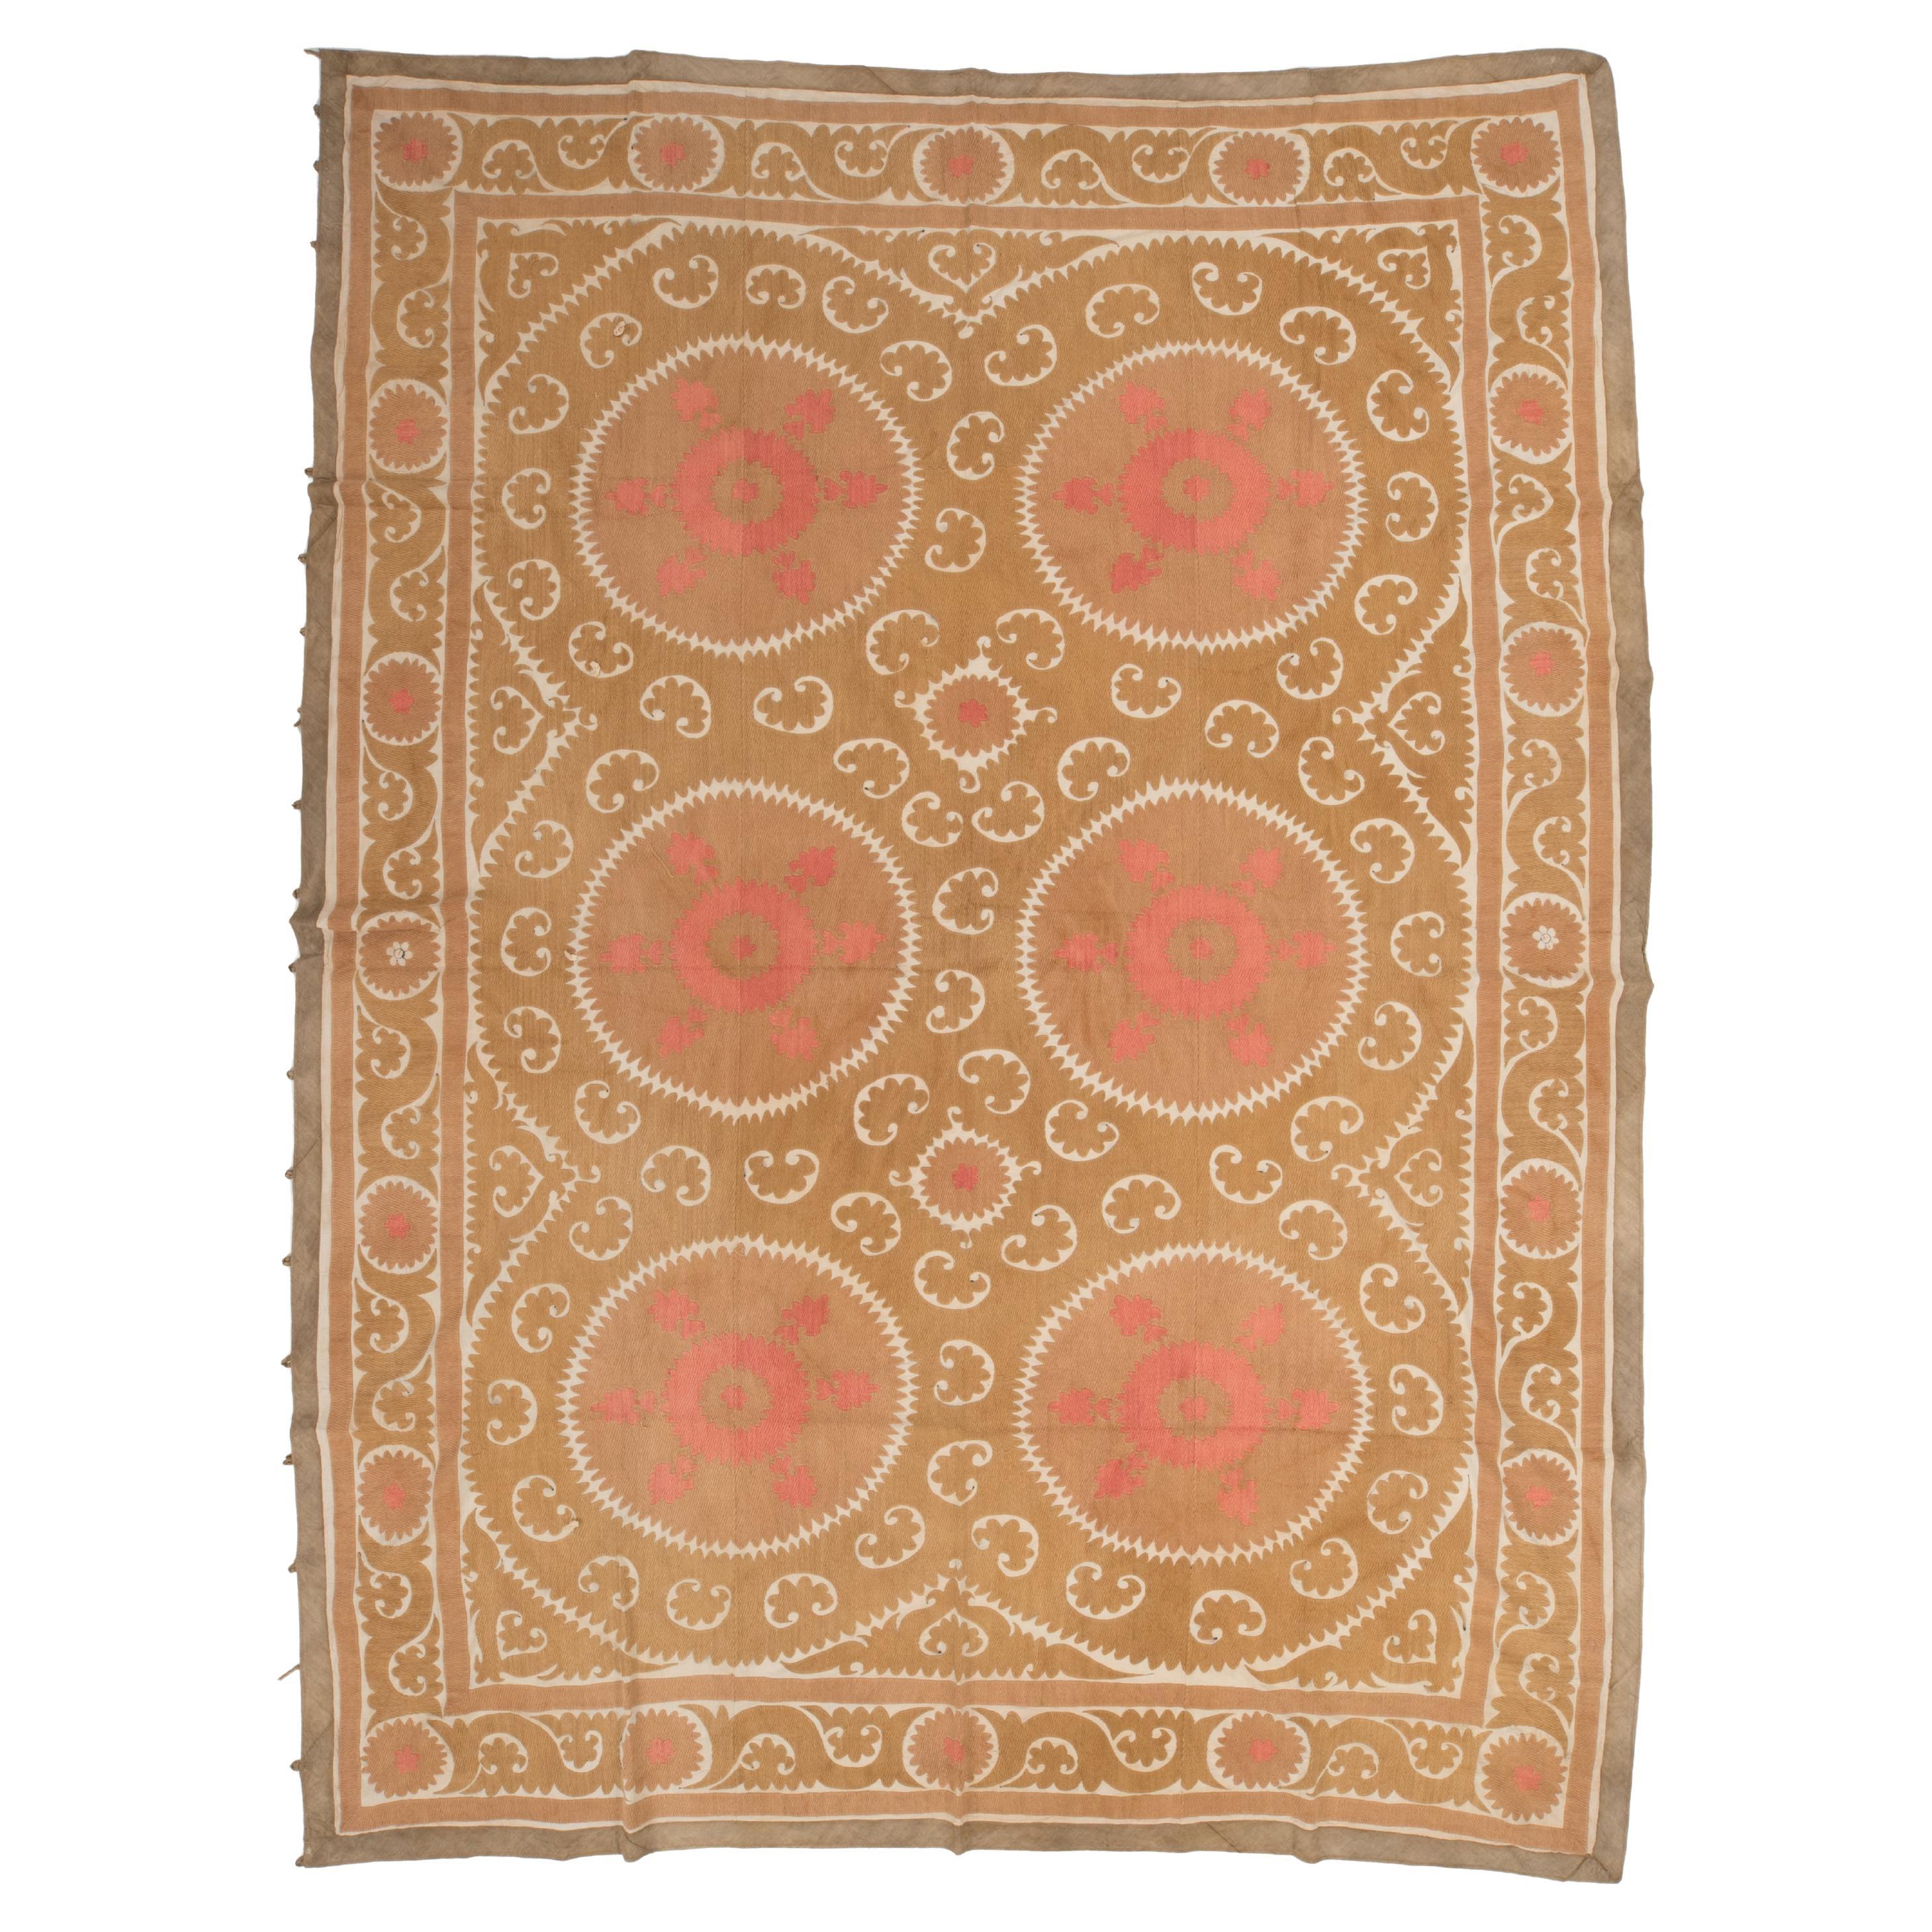 Decorative Mid 20th C. Neutral Samarkand Suzani with Pinks For Sale